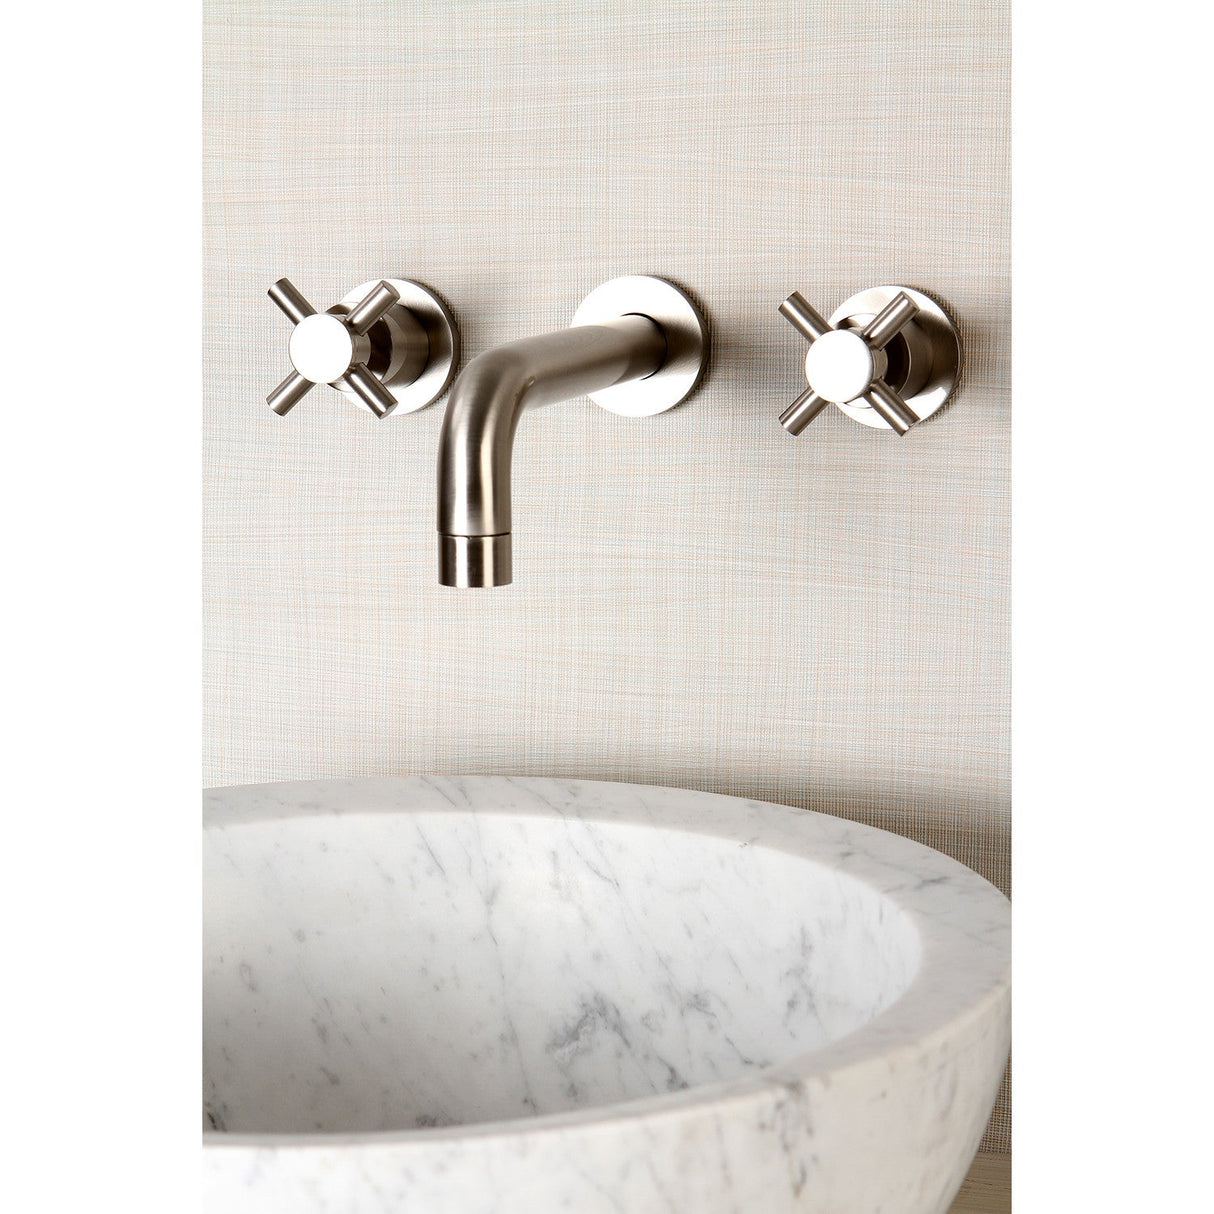 Concord KS8128DX Two-Handle 3-Hole Wall Mount Bathroom Faucet, Brushed Nickel